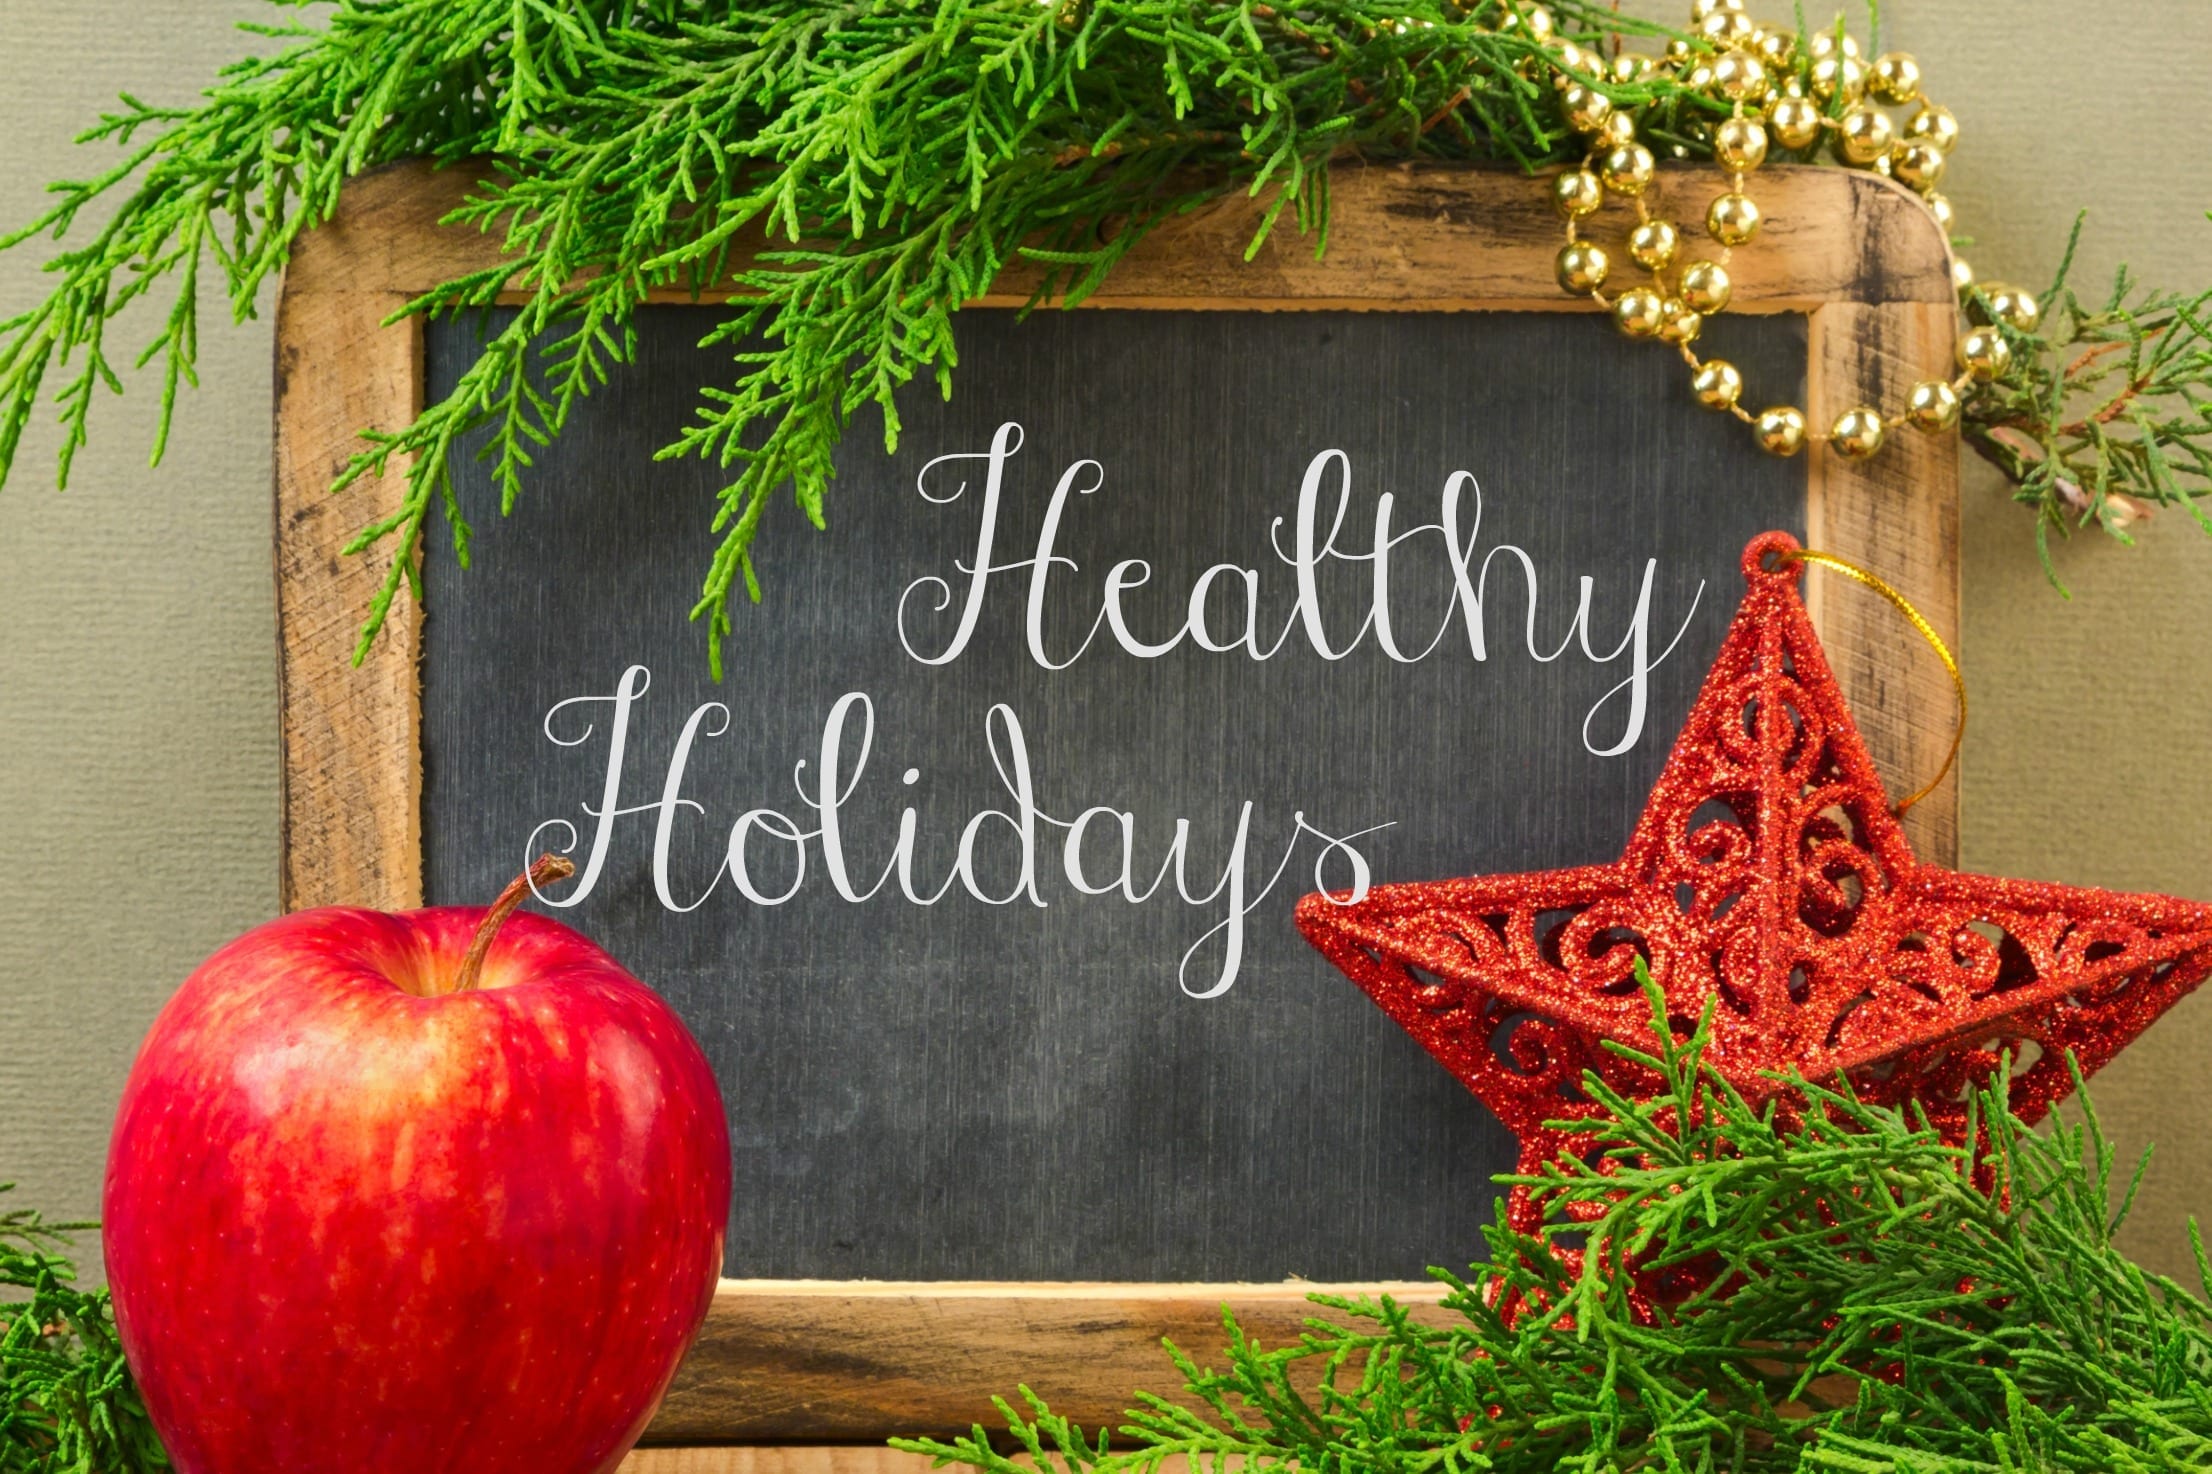 healthy holiday greens apple image